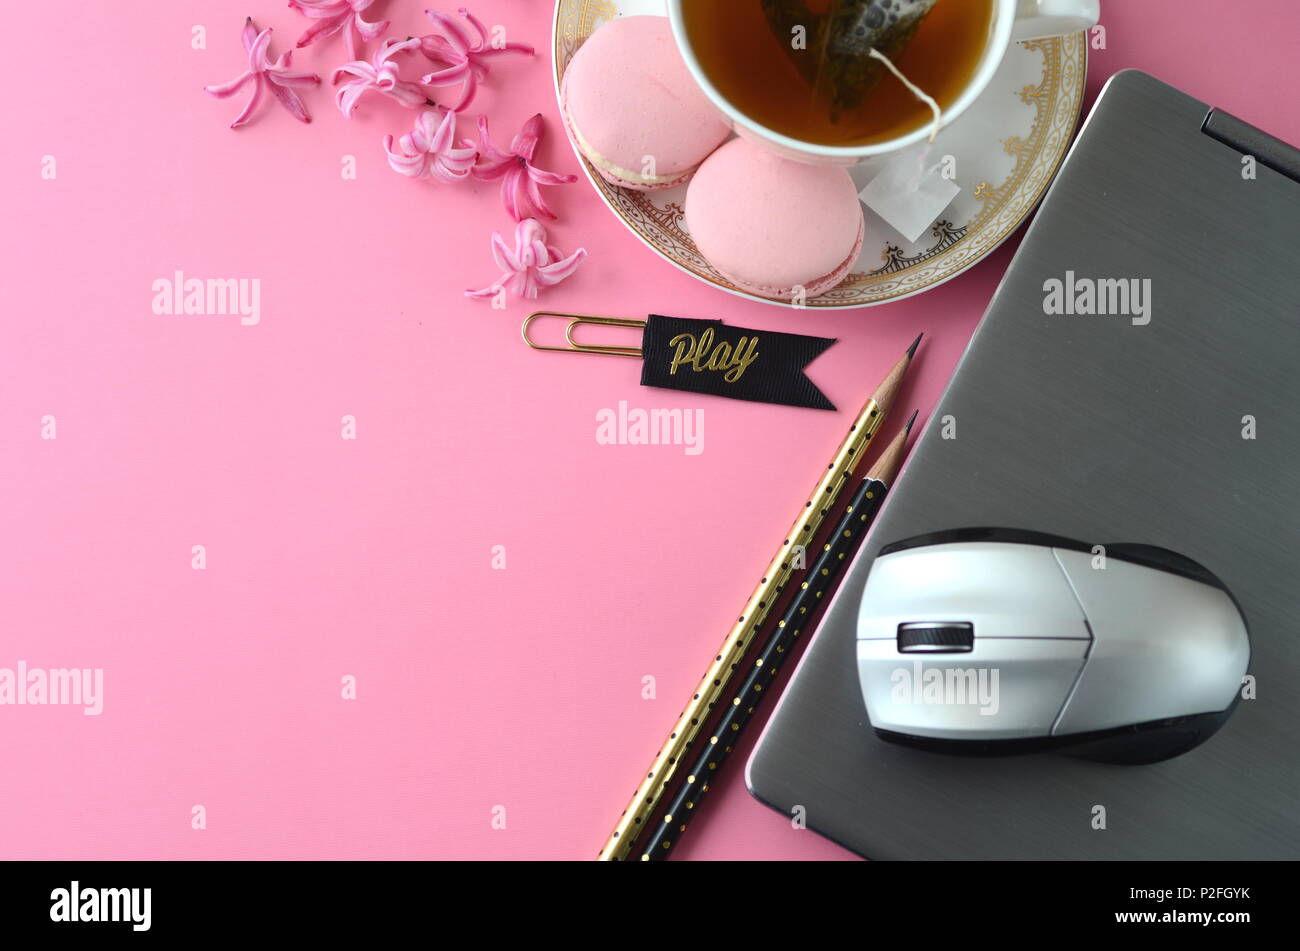 Top view flat layout of pink hyacinth, laptop, tea cup, French macarons on pink background. Feminine workspace. Working from home, freelancing concept Stock Photo